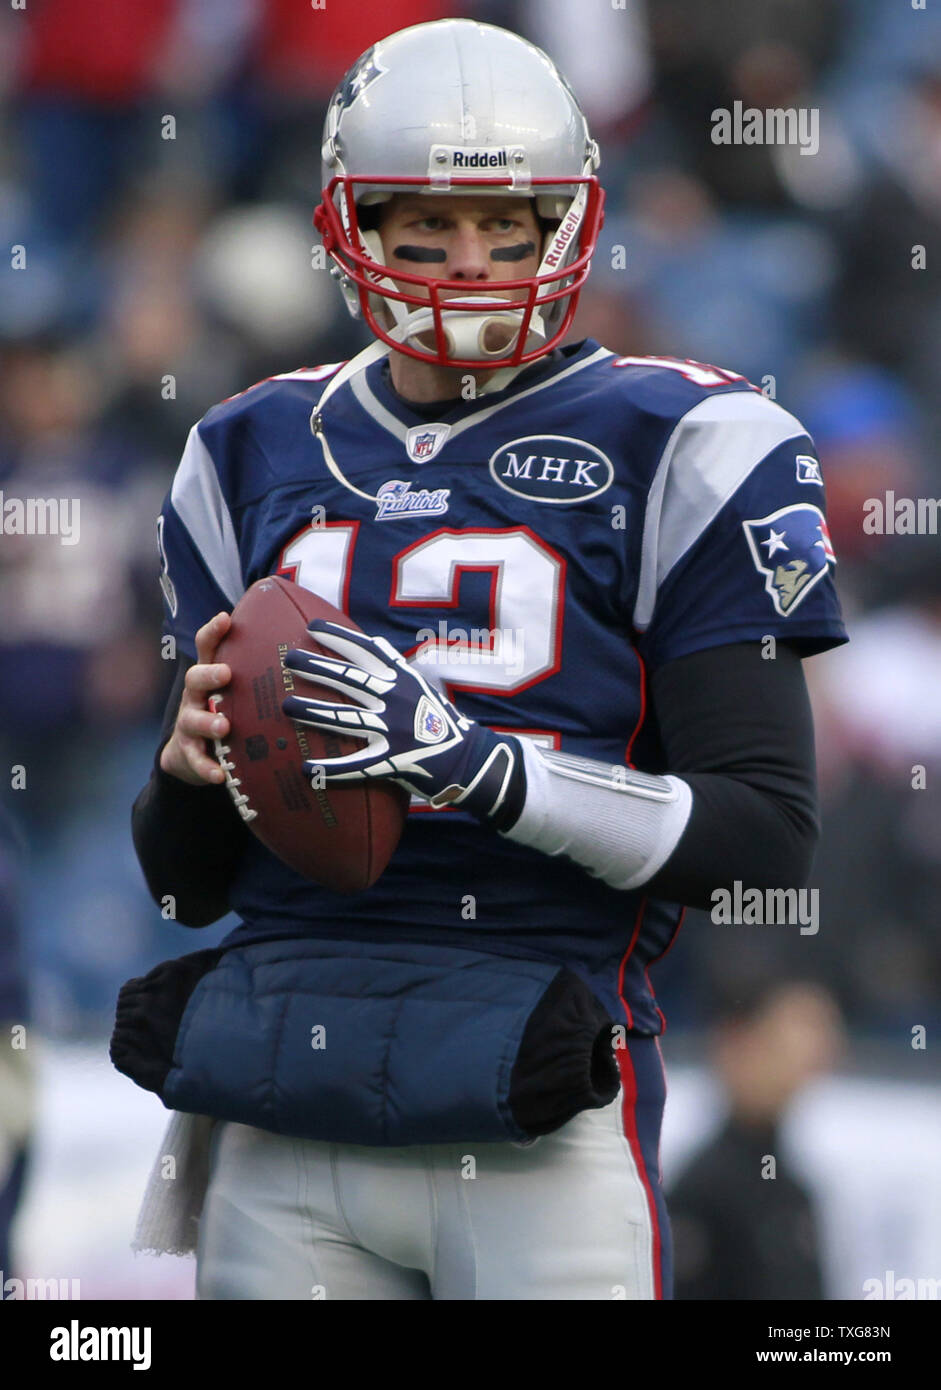 New England Patriots quarterback Tom Brady warms up before the AFC Championship game against the Baltimore Ravens at Gillette Stadium in Foxboro, Massachusetts on January 22, 2012.   UPI/Matthew Healey Stock Photo